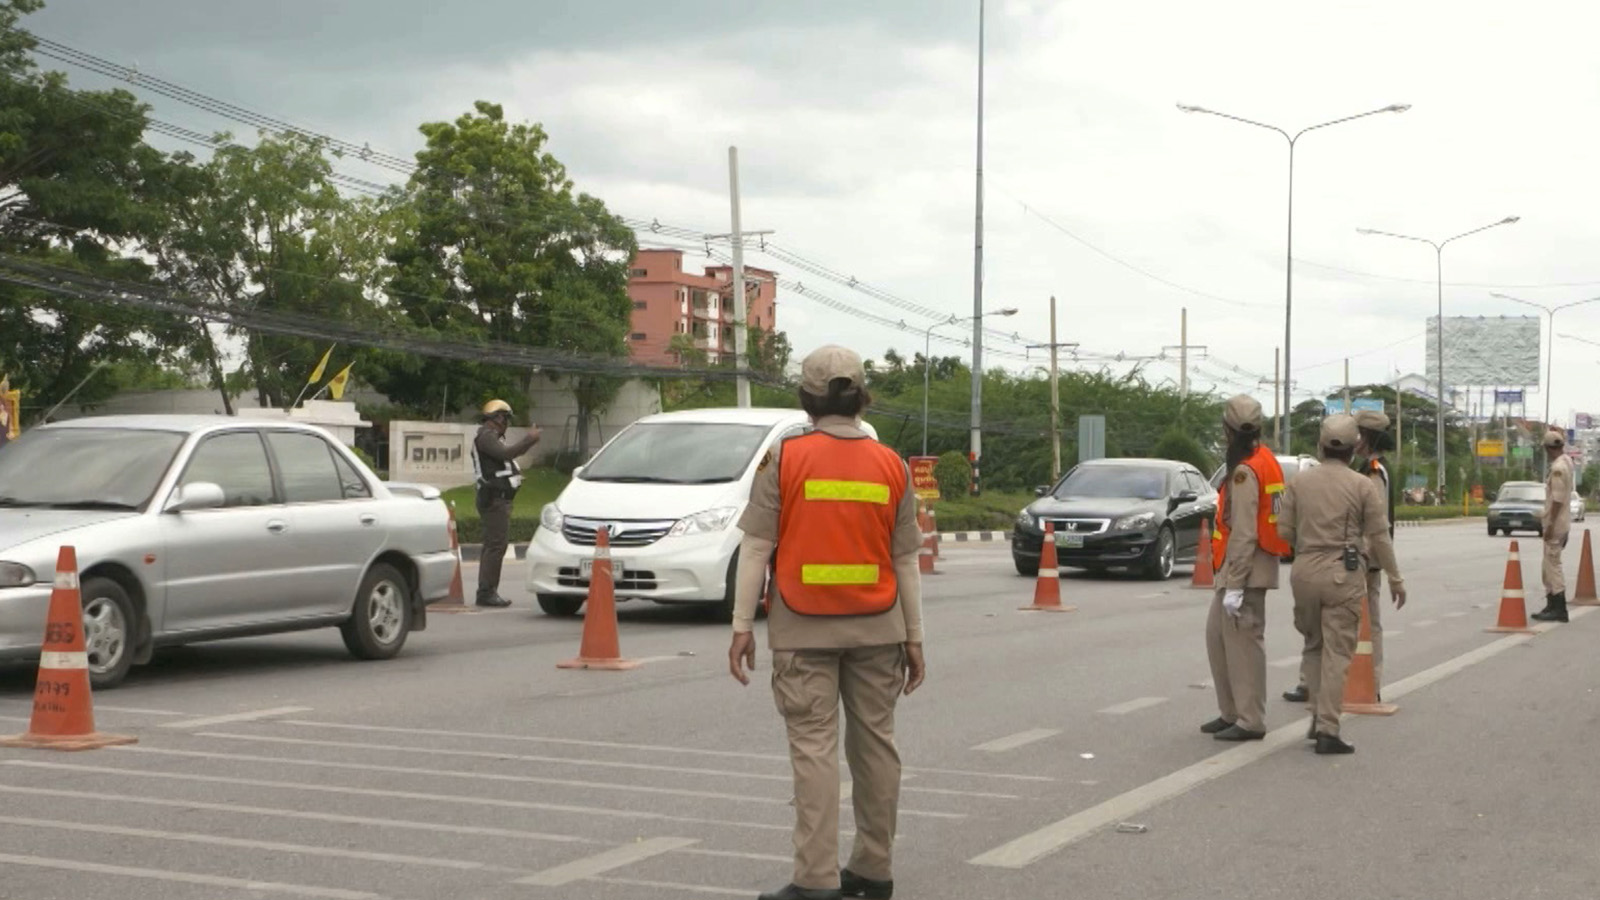 Security measures increased across Thailand following deadly blast